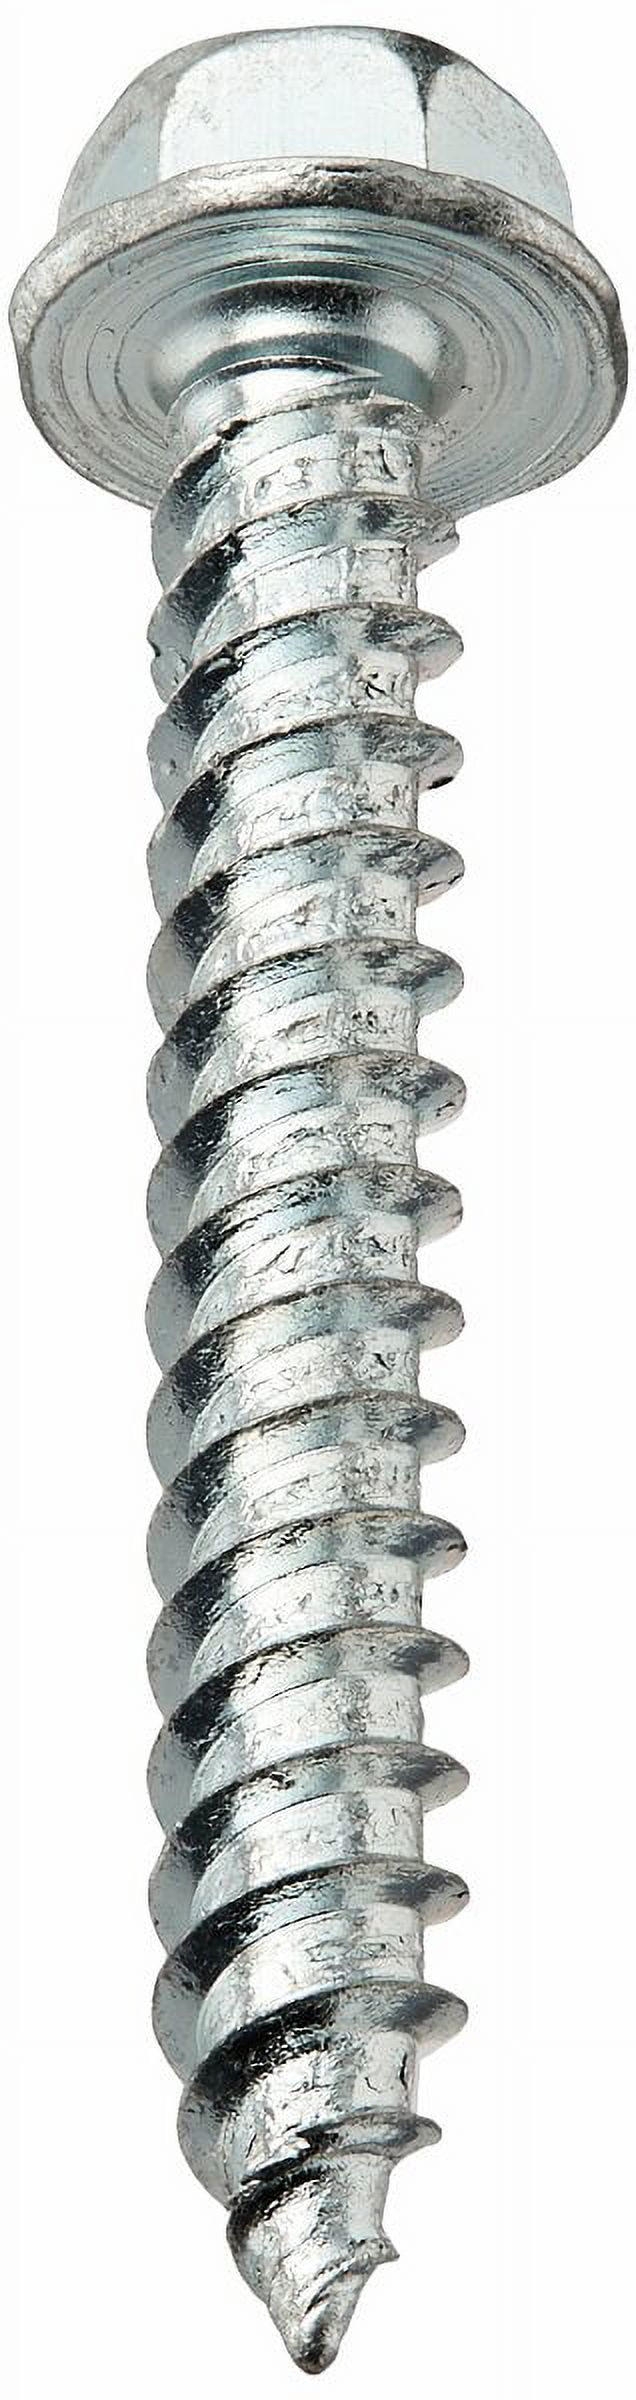 AP Products 012-TR500 8 X 1-1/4 8 x 1-1/4" MH/RV Hex Washer Head Screw 500 Pack - image 4 of 6